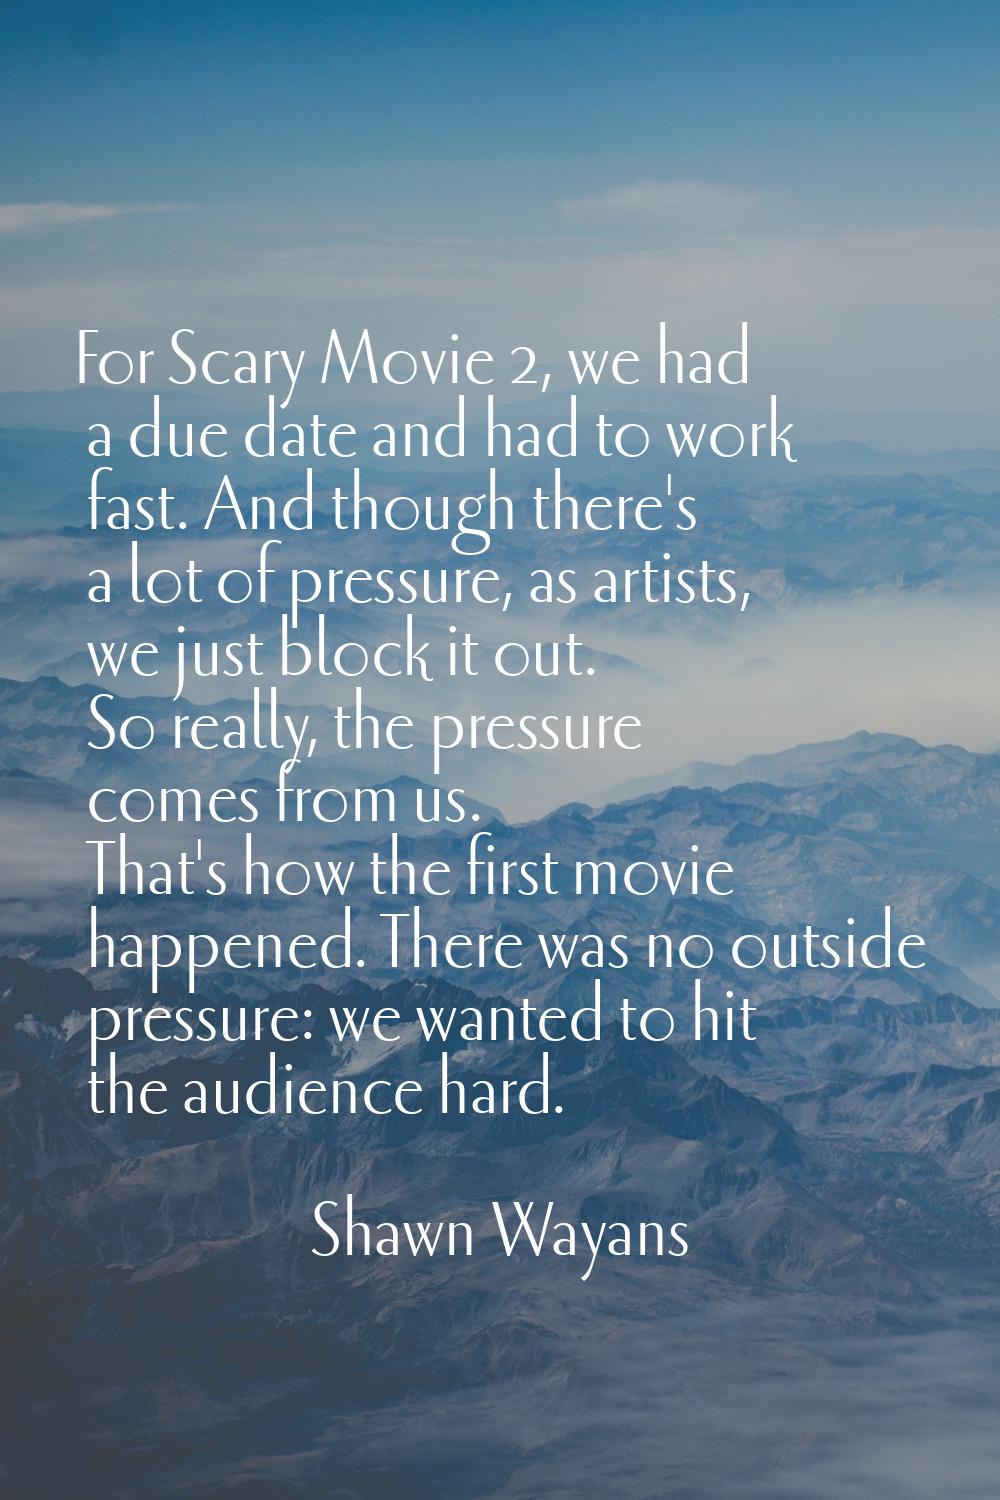 For Scary Movie 2, we had a due date and had to work fast. And though there's a lot of pressure, as